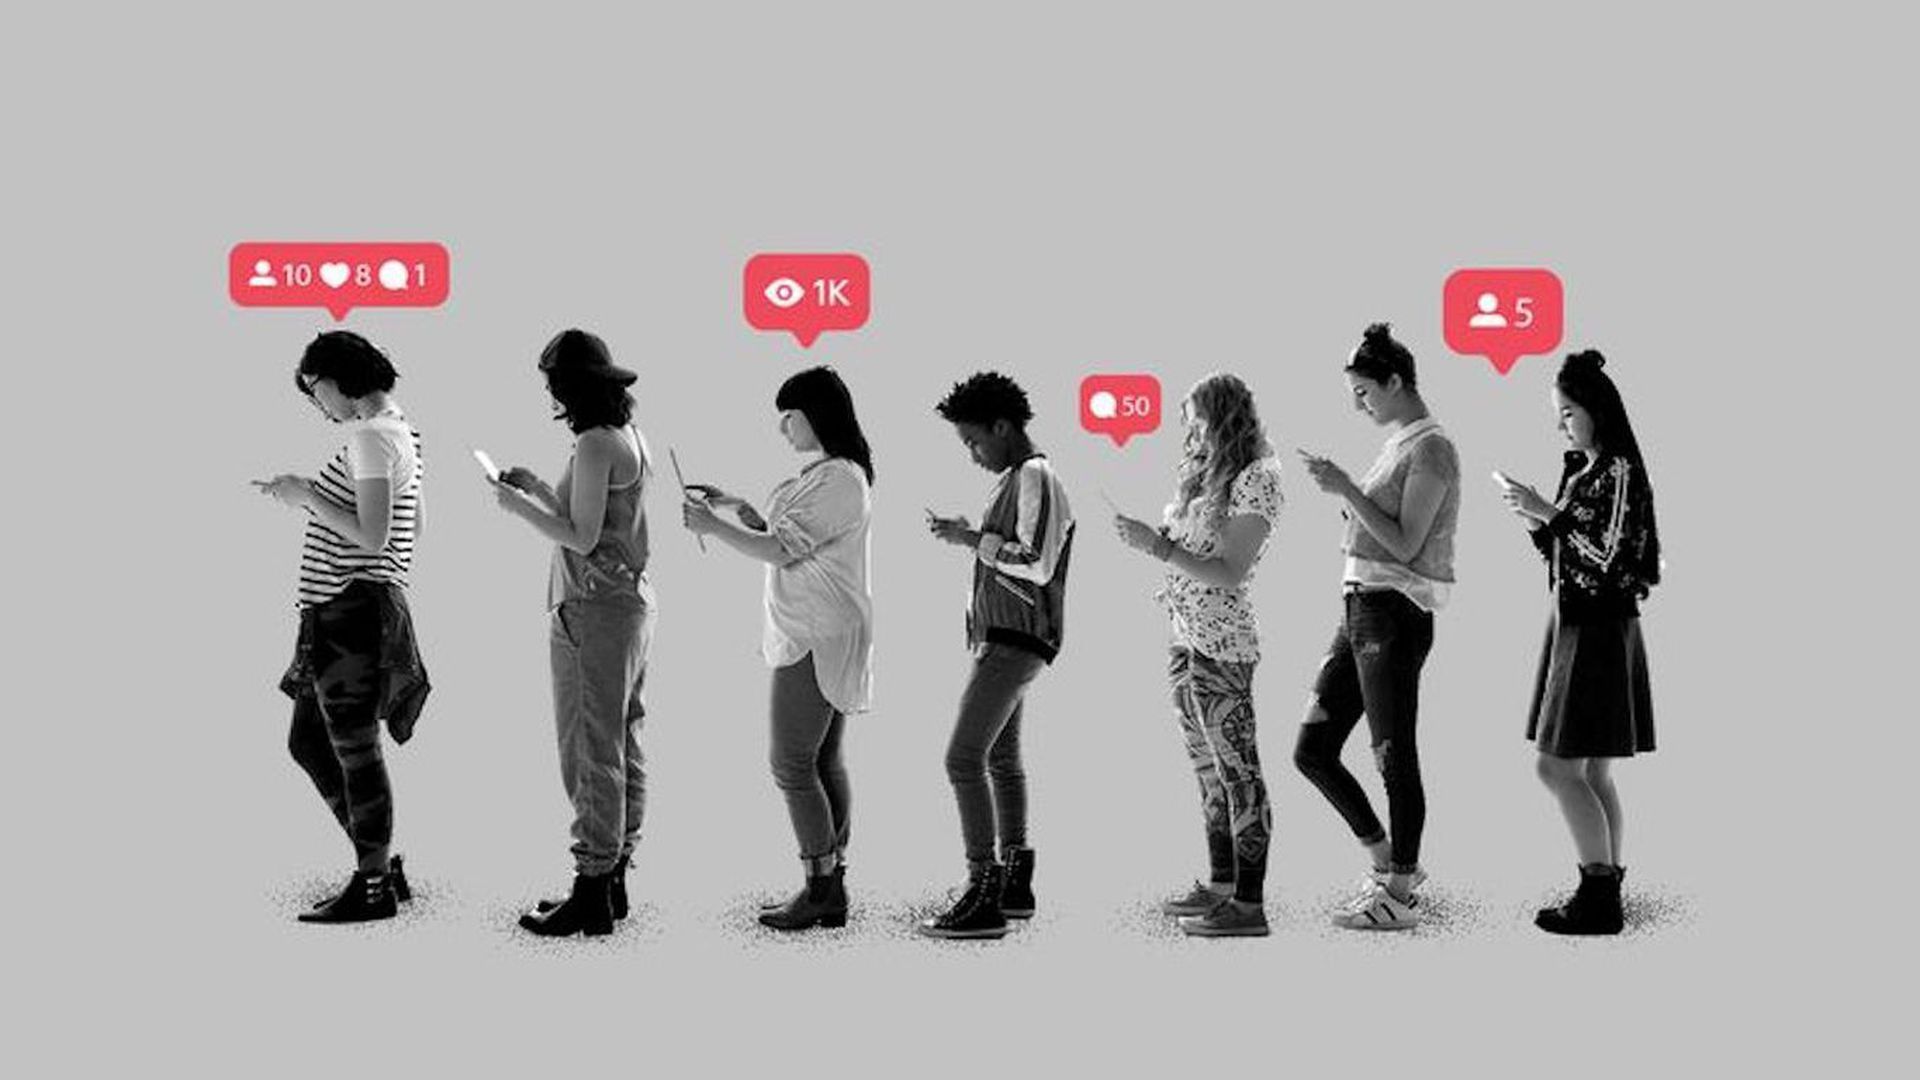 An illustration of young people checking their phone and their "likes" on social media